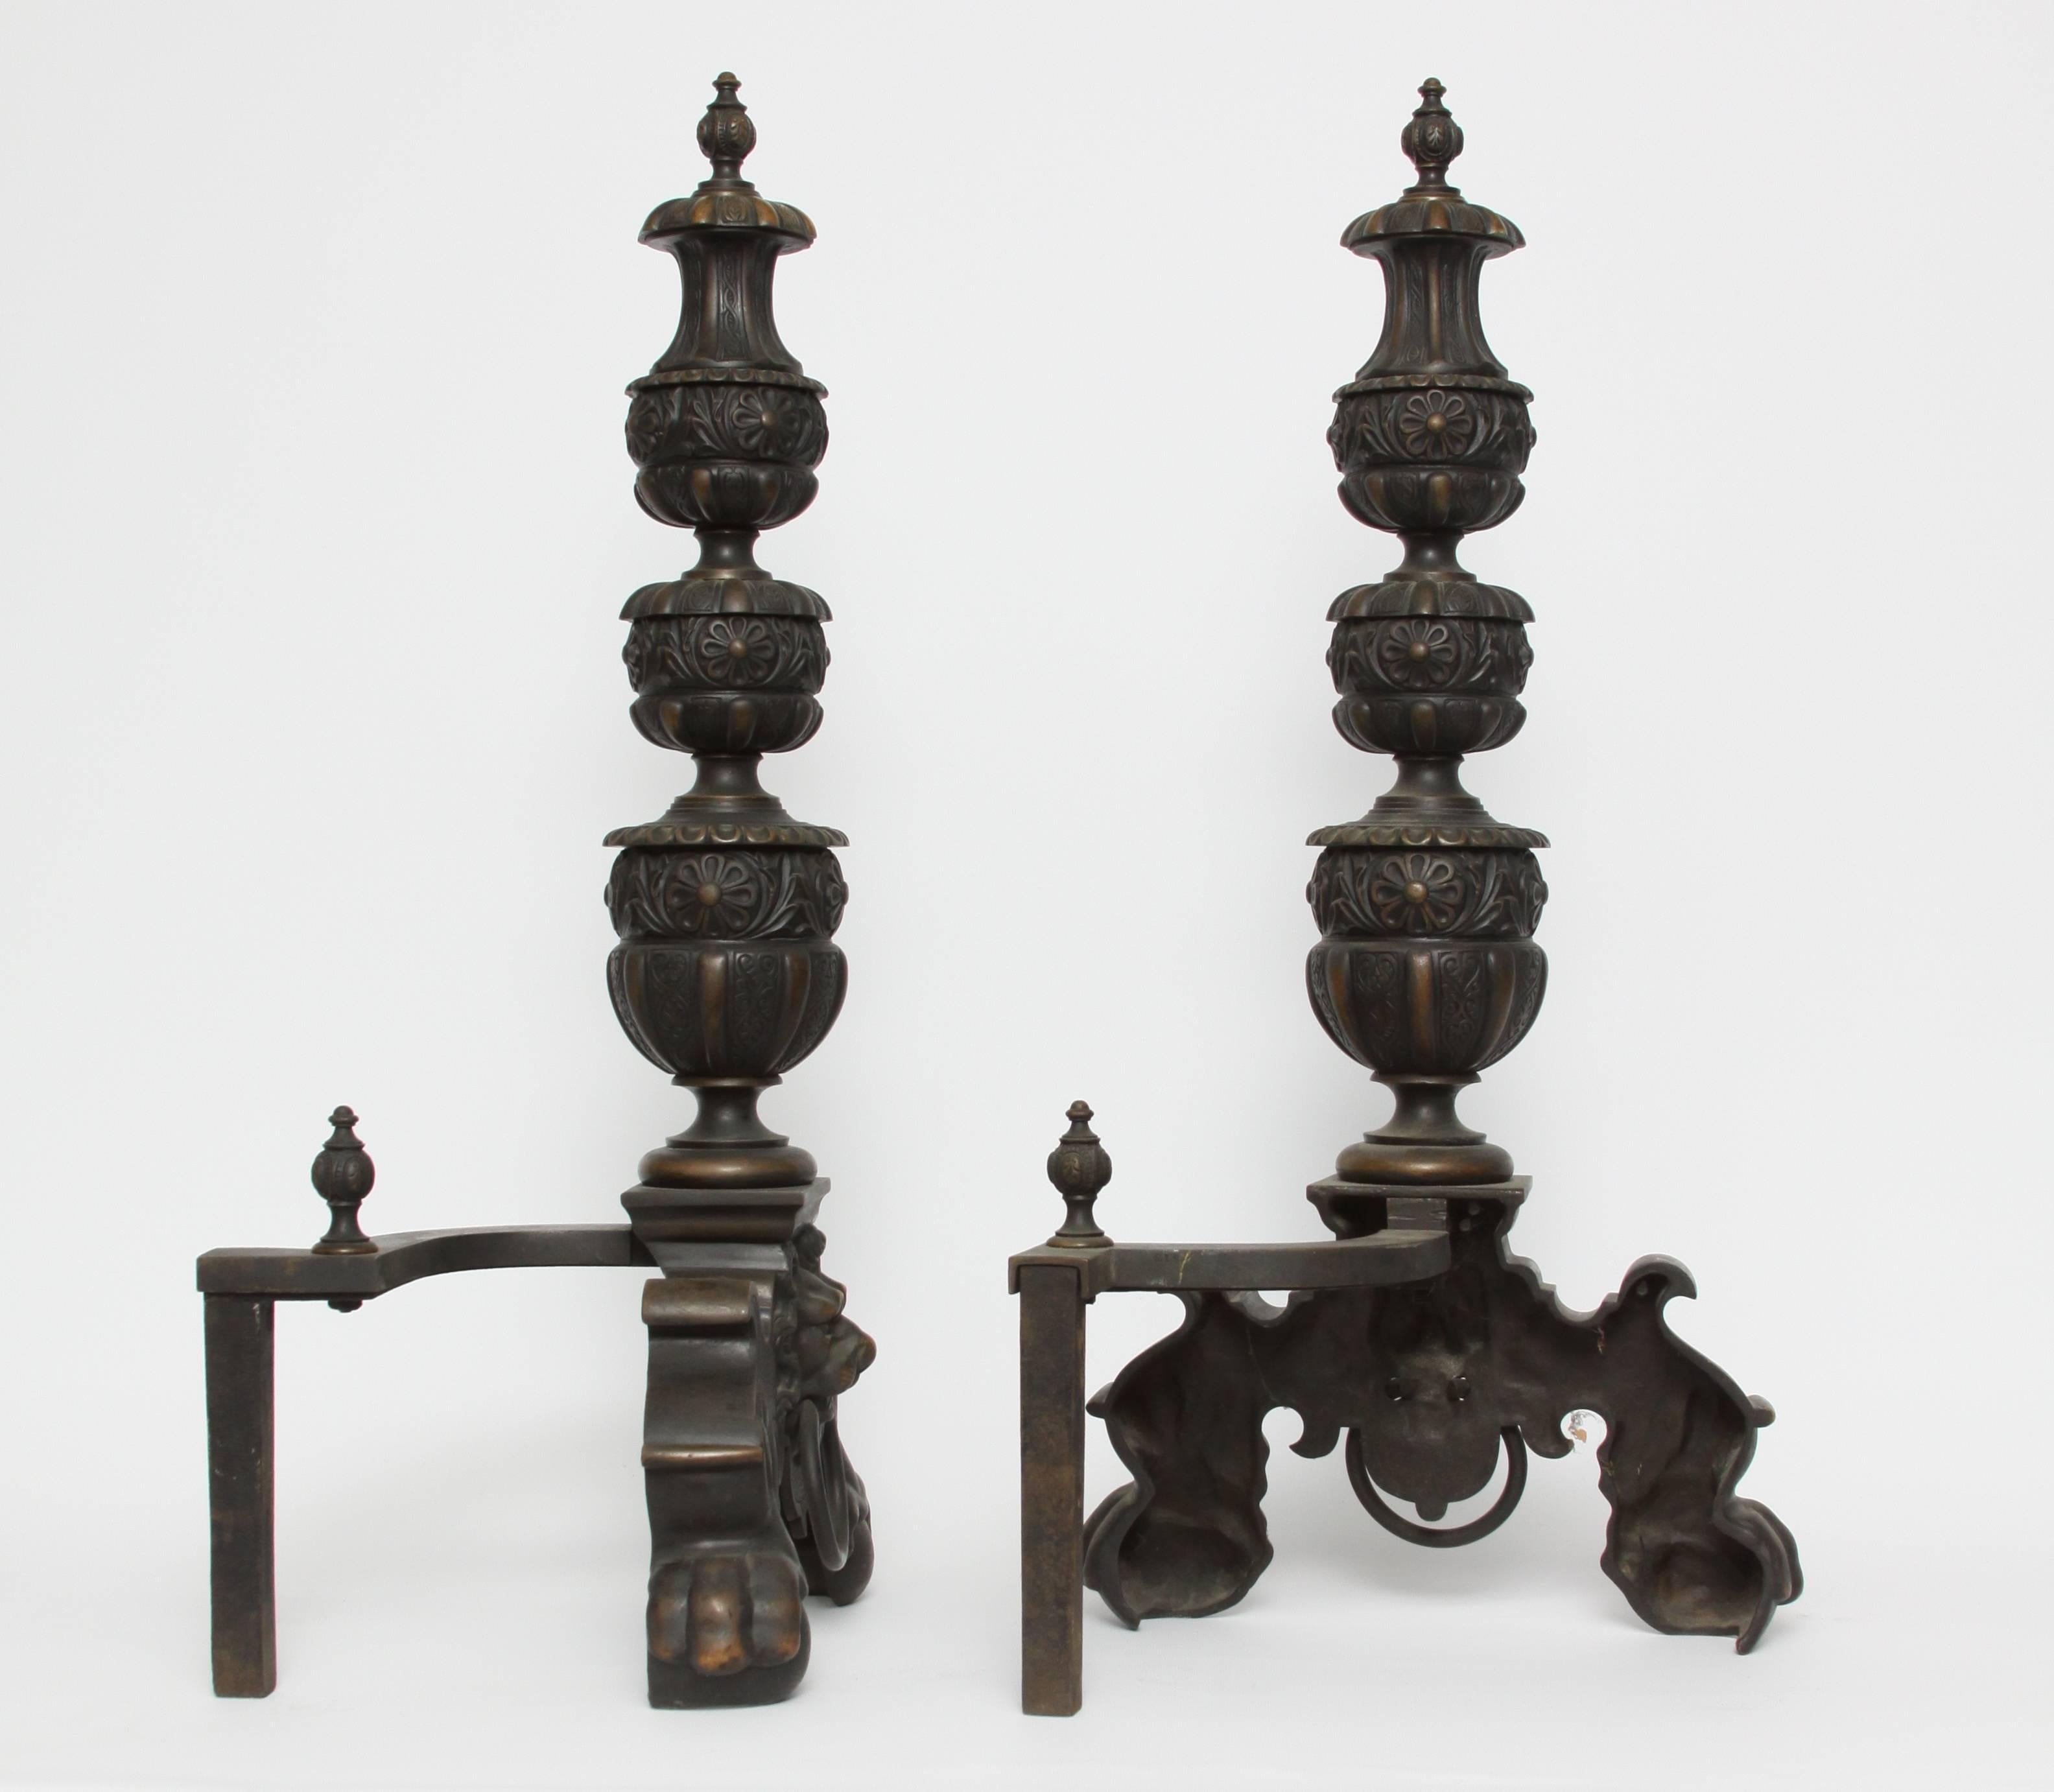 Gadrooned knopped baluster form with lion's masks and rings on claw and ball feet